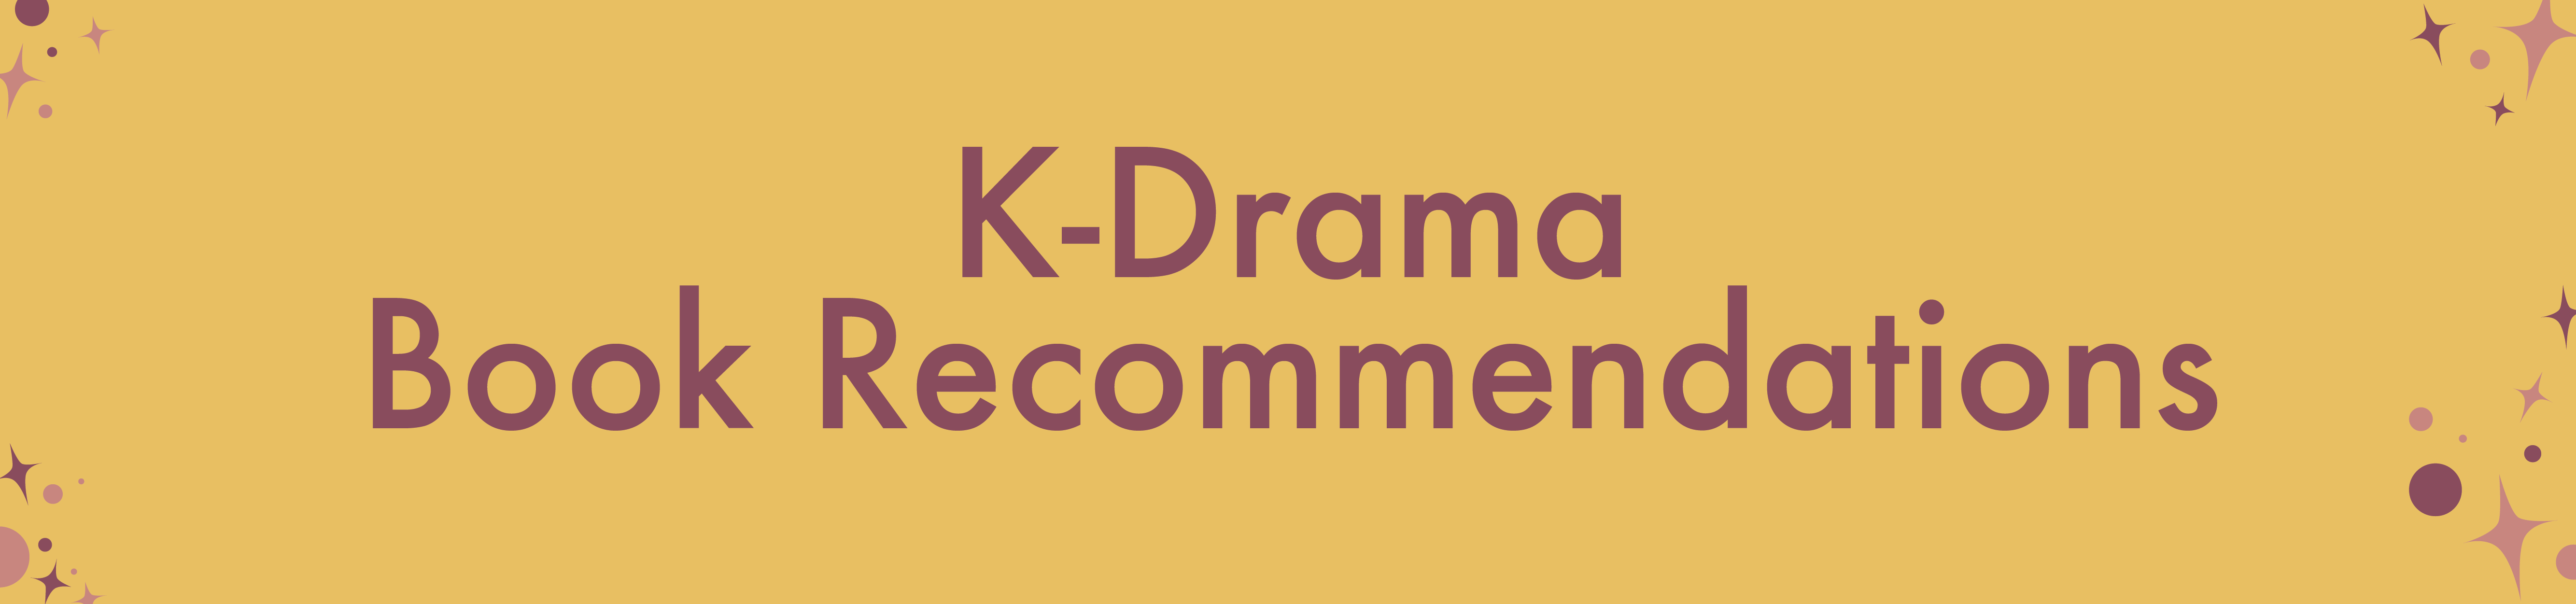 K-Drama Book Recommendations header